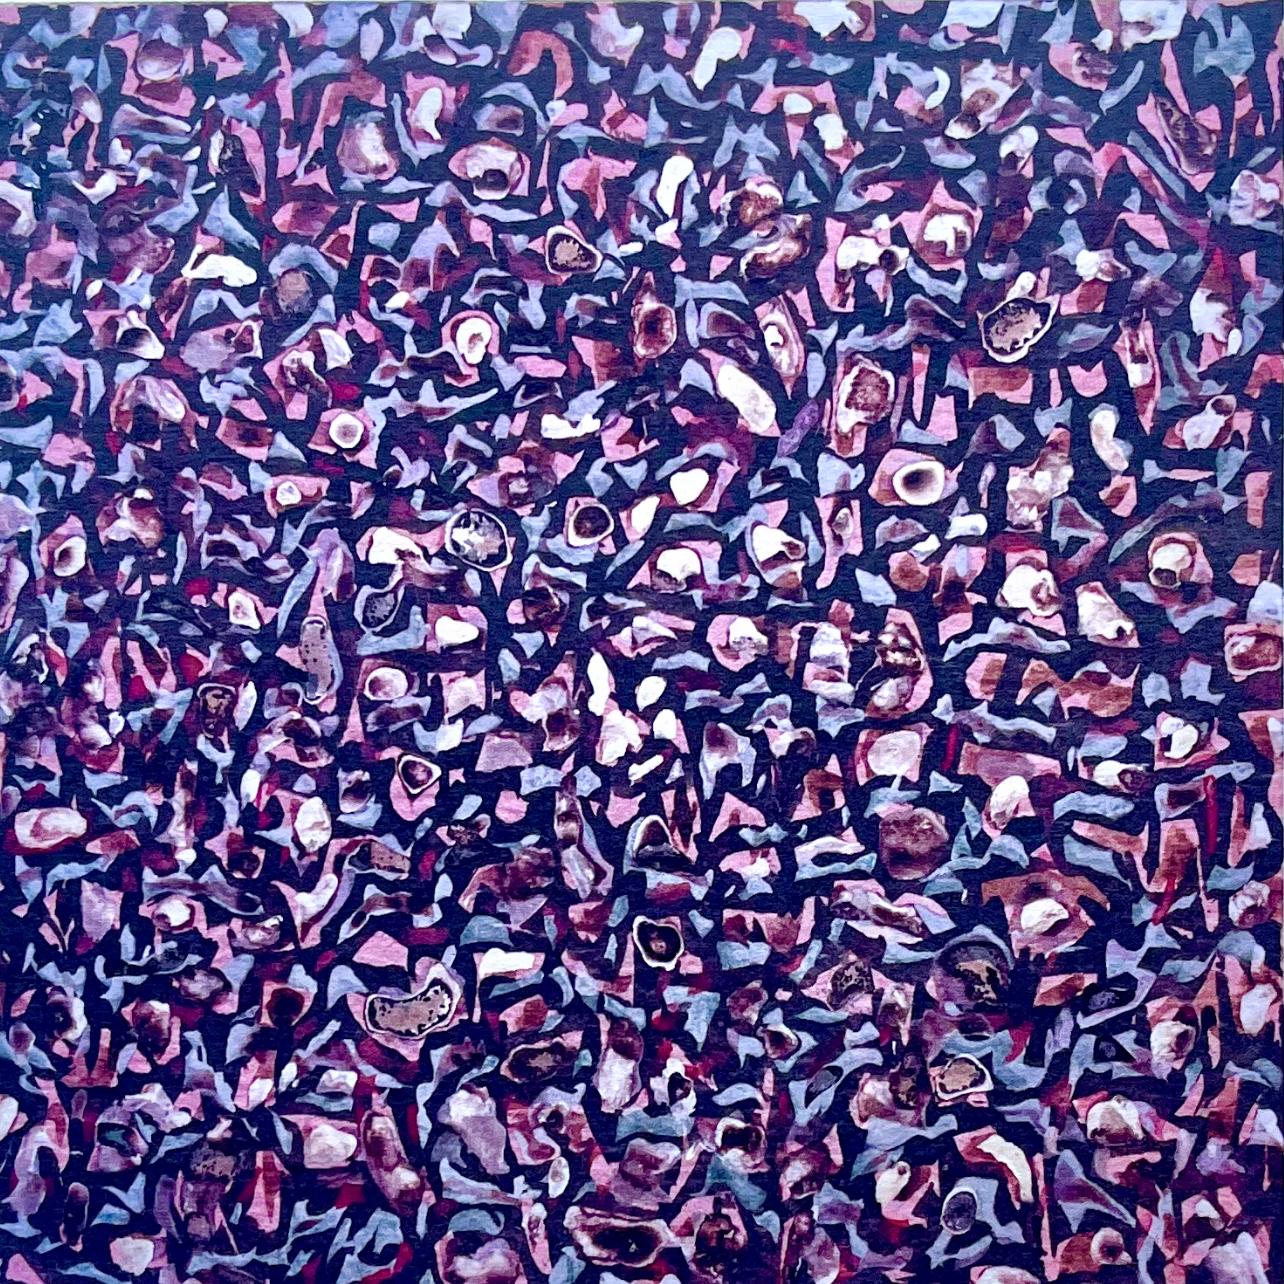 Lithograph on wove paper. Unsigned and unnumbered, as issued. Good Condition; never framed or matted. Notes: From the folio, Mark Tobey: Peintres d'aujourd'hui, 1961. Published by Fernand Hazan, Paris; lithographic plates produced by Clichés Union,